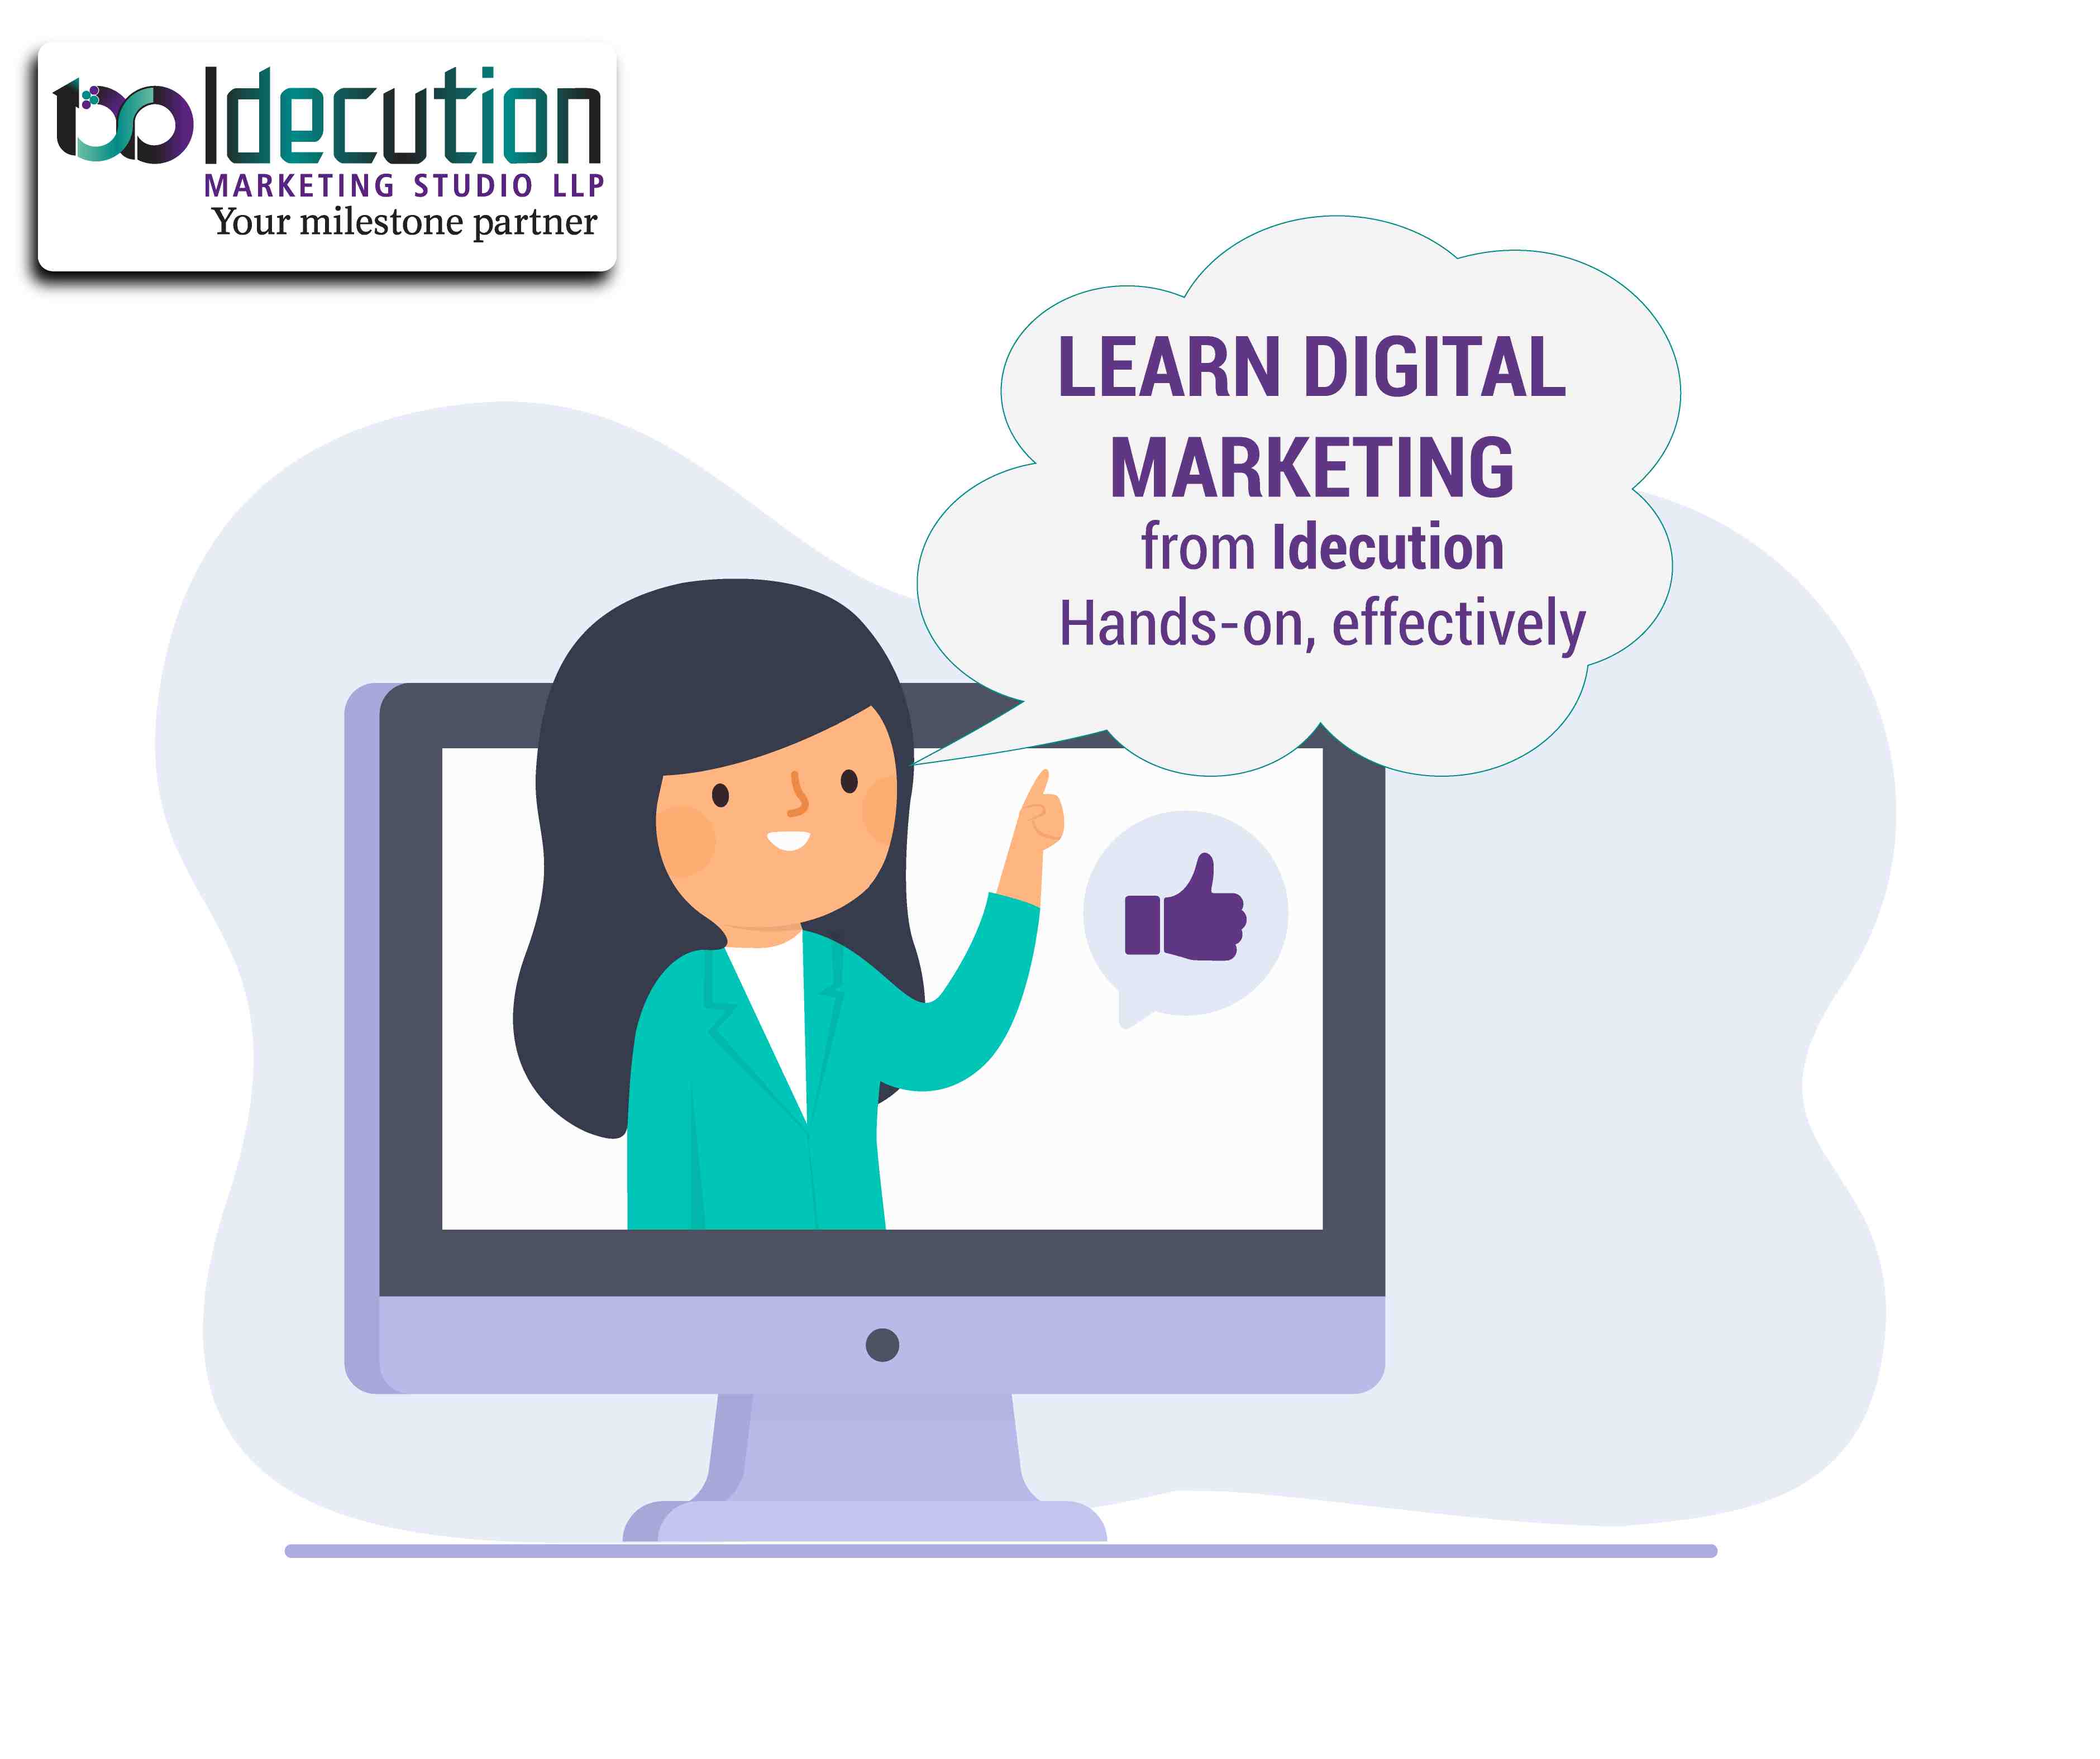 Details of digital marketing course by Idecution